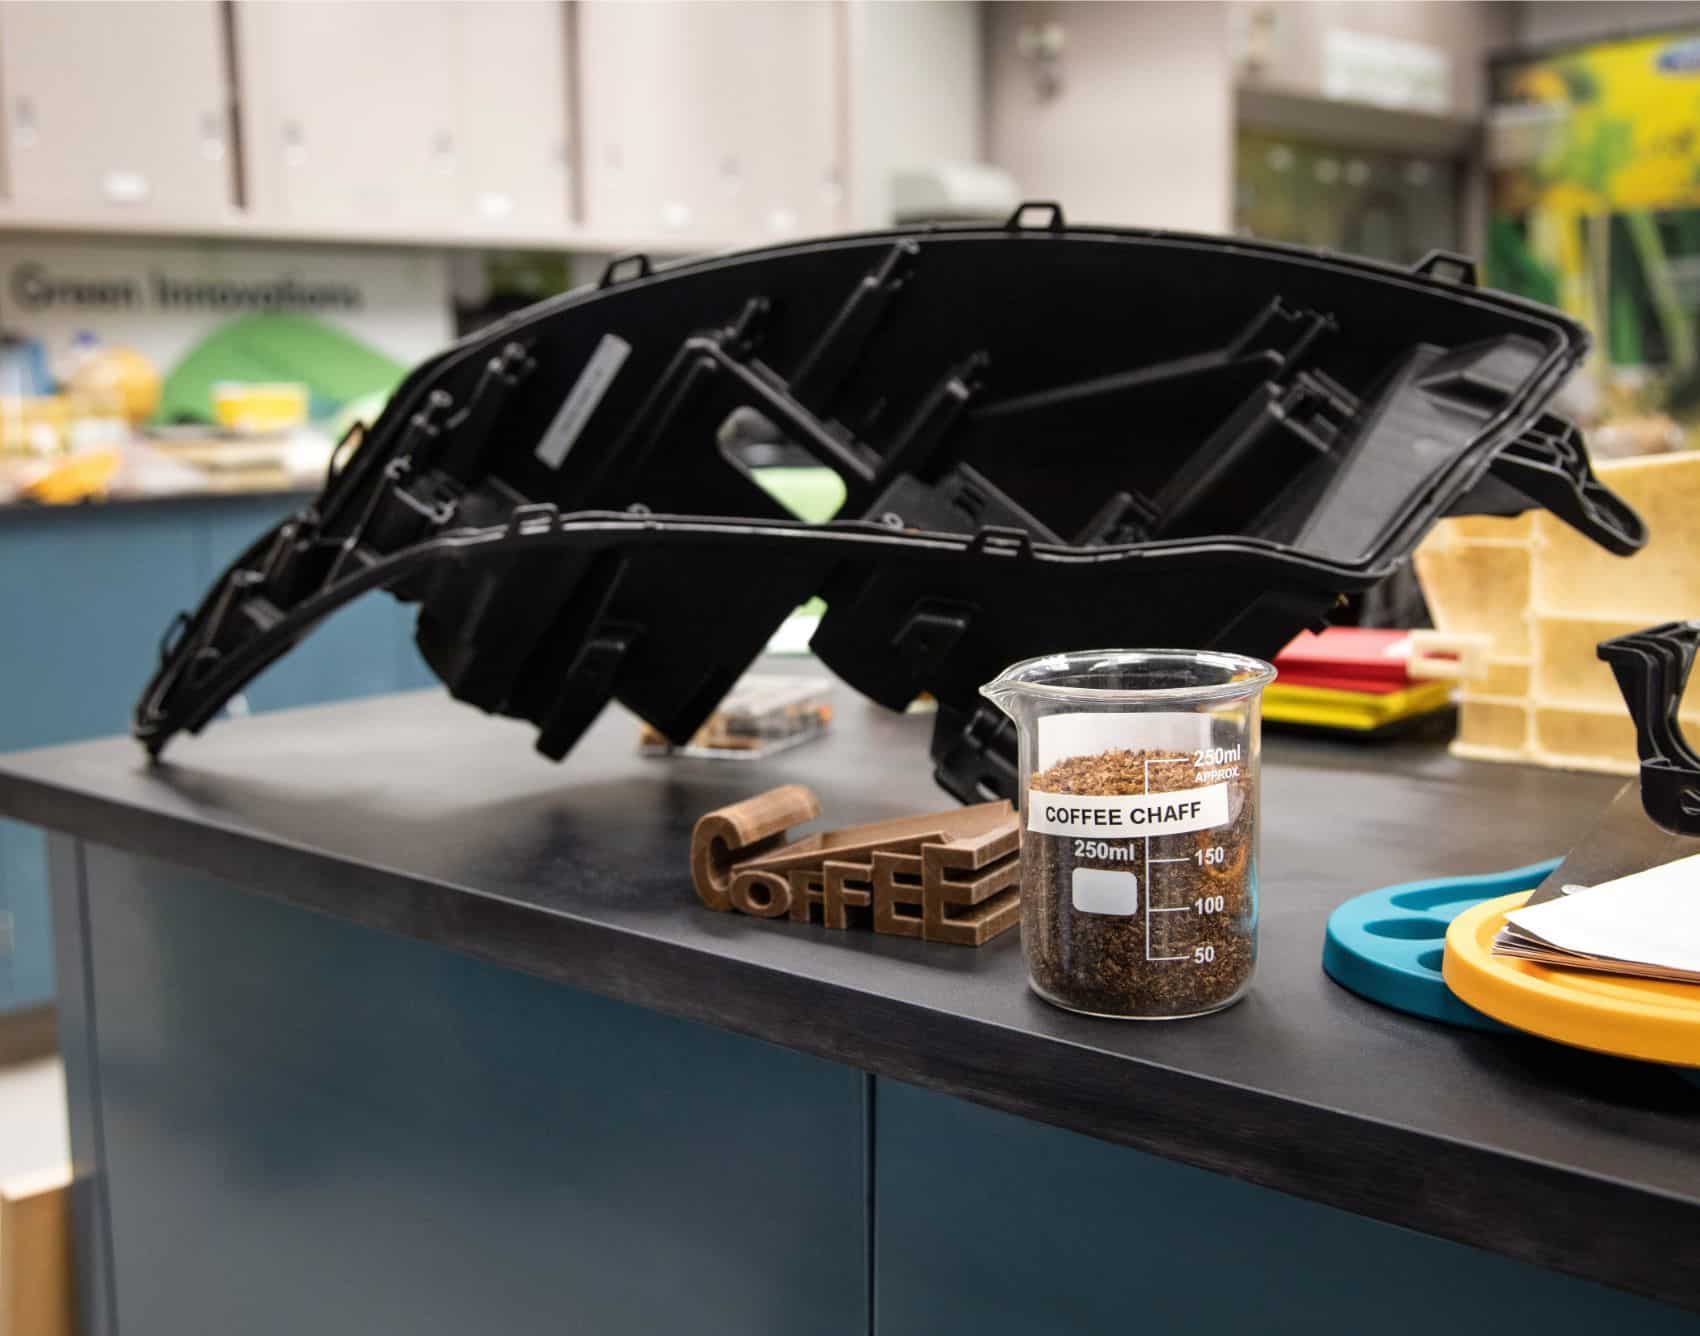 Ford Motor Company and McDonald’s will soon be giving vehicles a caffeine boost by using coffee beans to make certain car parts and components.